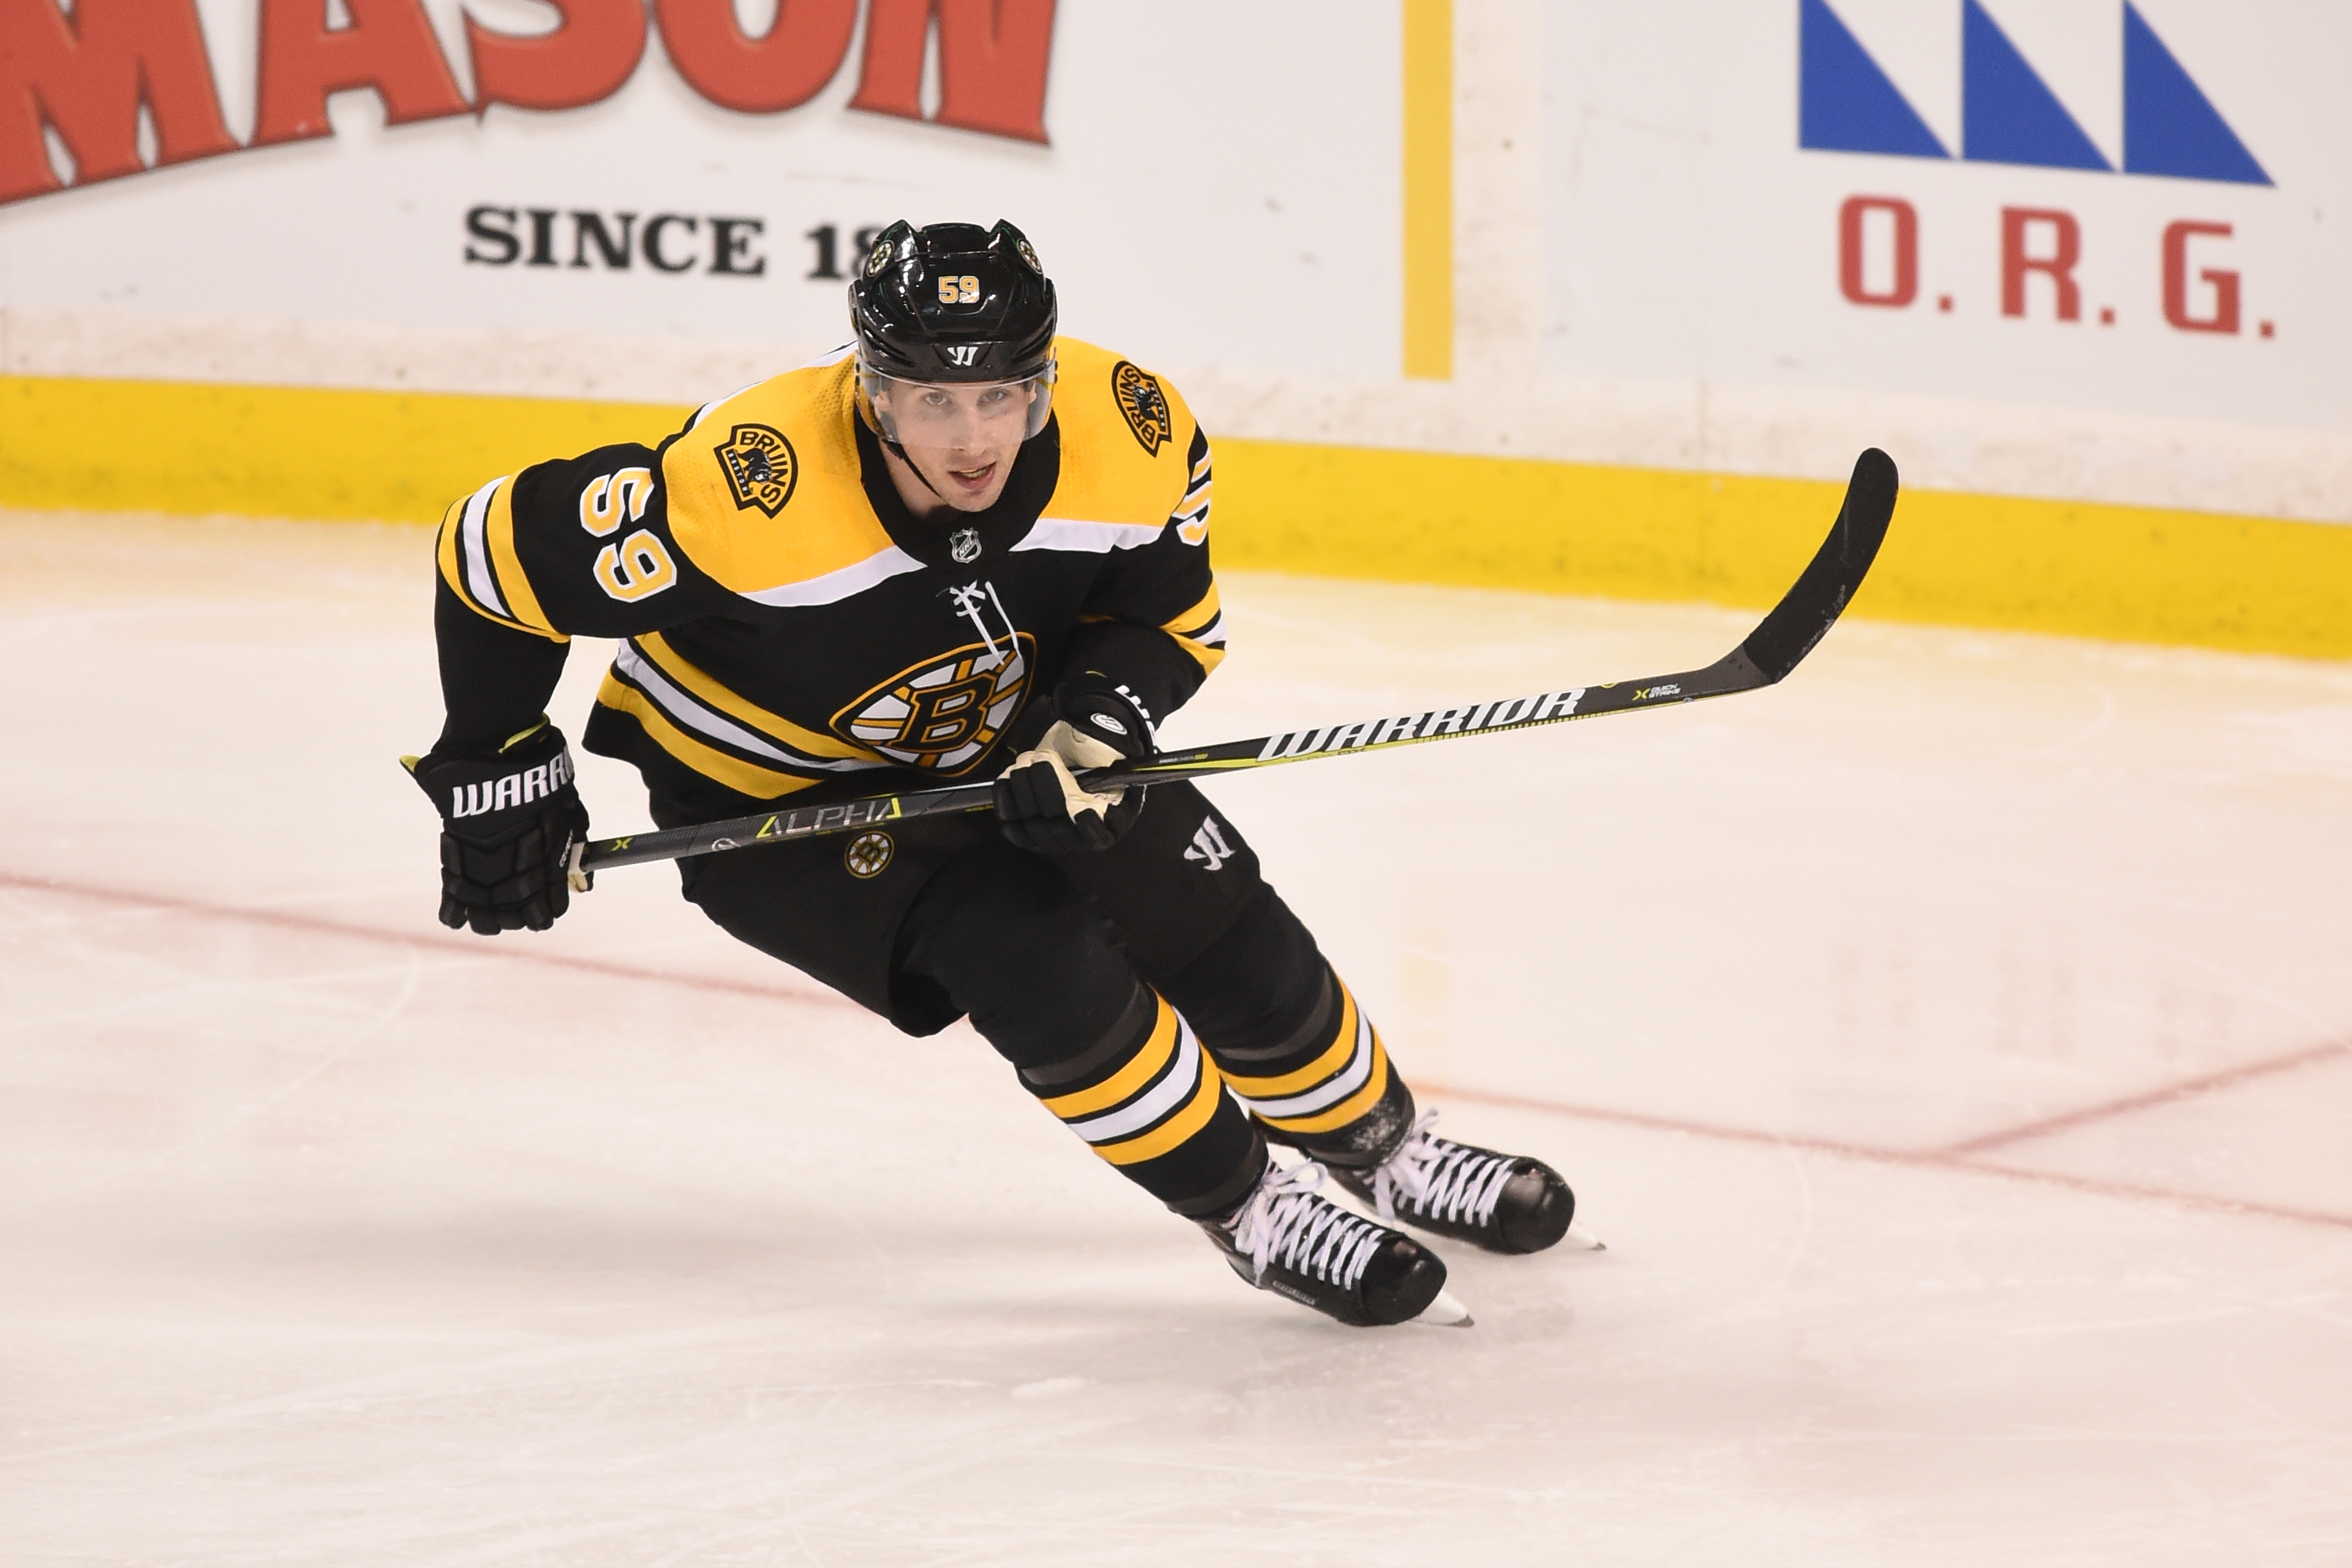 Tim Schaller #59 of the Boston Bruins skates against the Florida Panthers at the TD Garden, on March 31, 2018, in Boston, Massachusetts. | Source: Getty Images